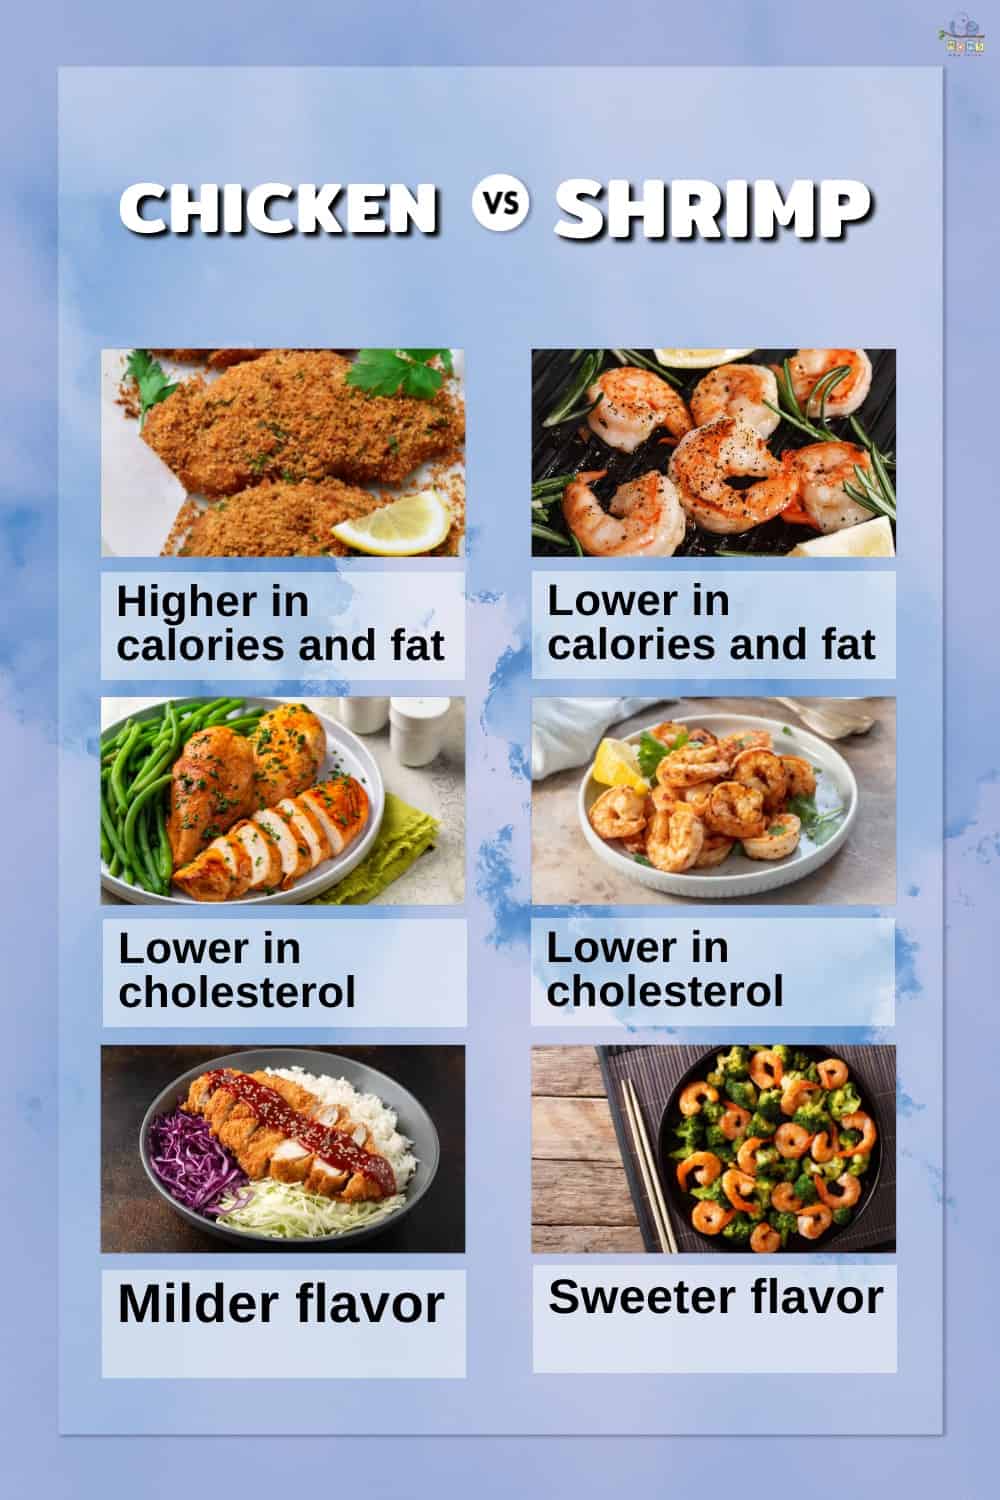 Infographic comparing chicken and shrimp.